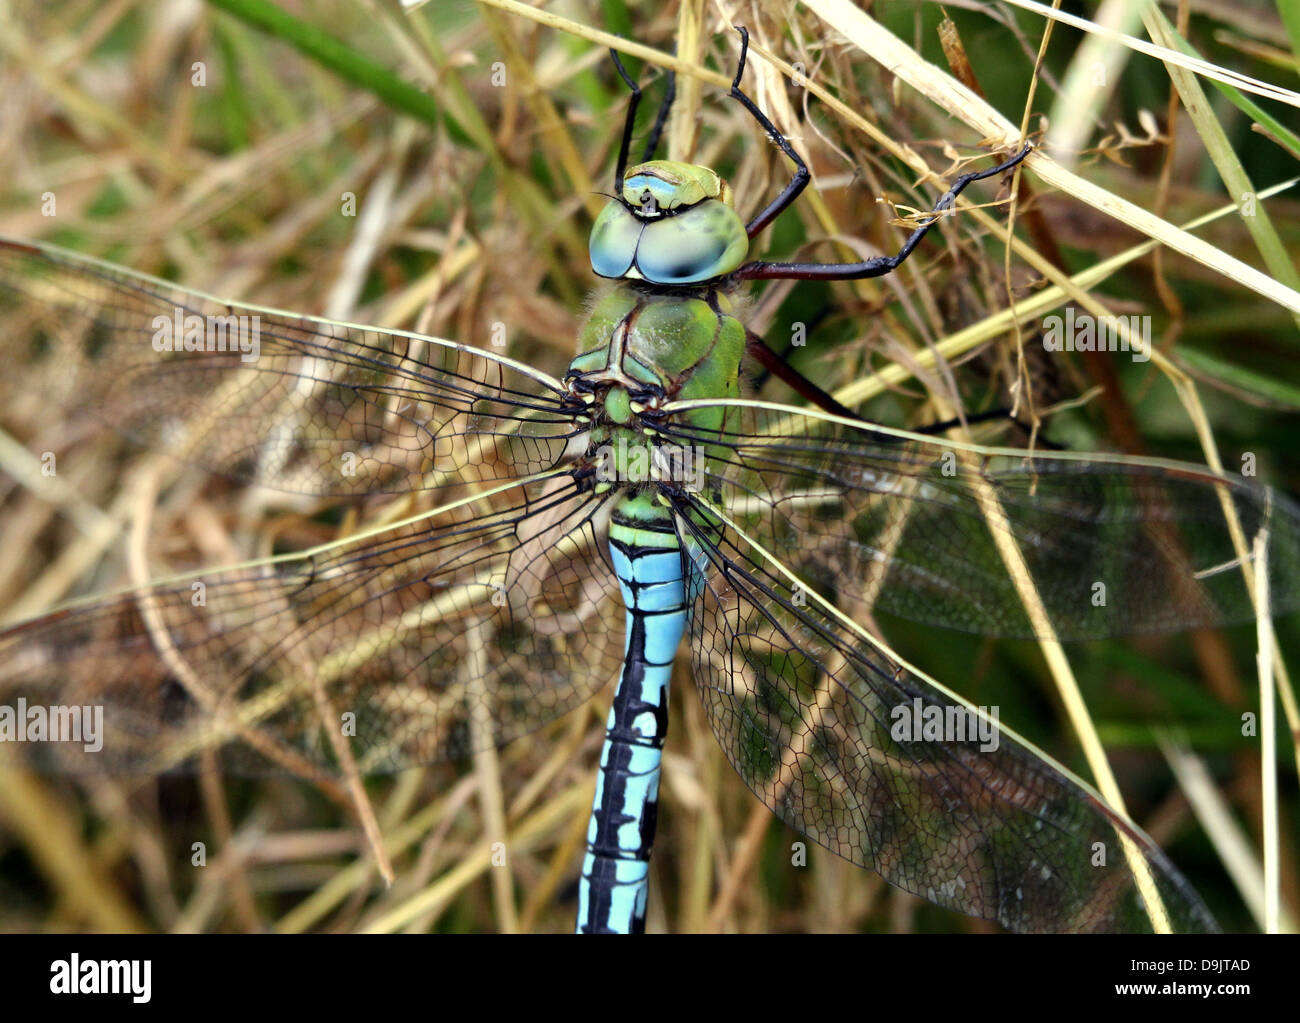 Detailed macro of a male Blue Emperor Dragonfly (Anax imperator) posing on the ground Stock Photo